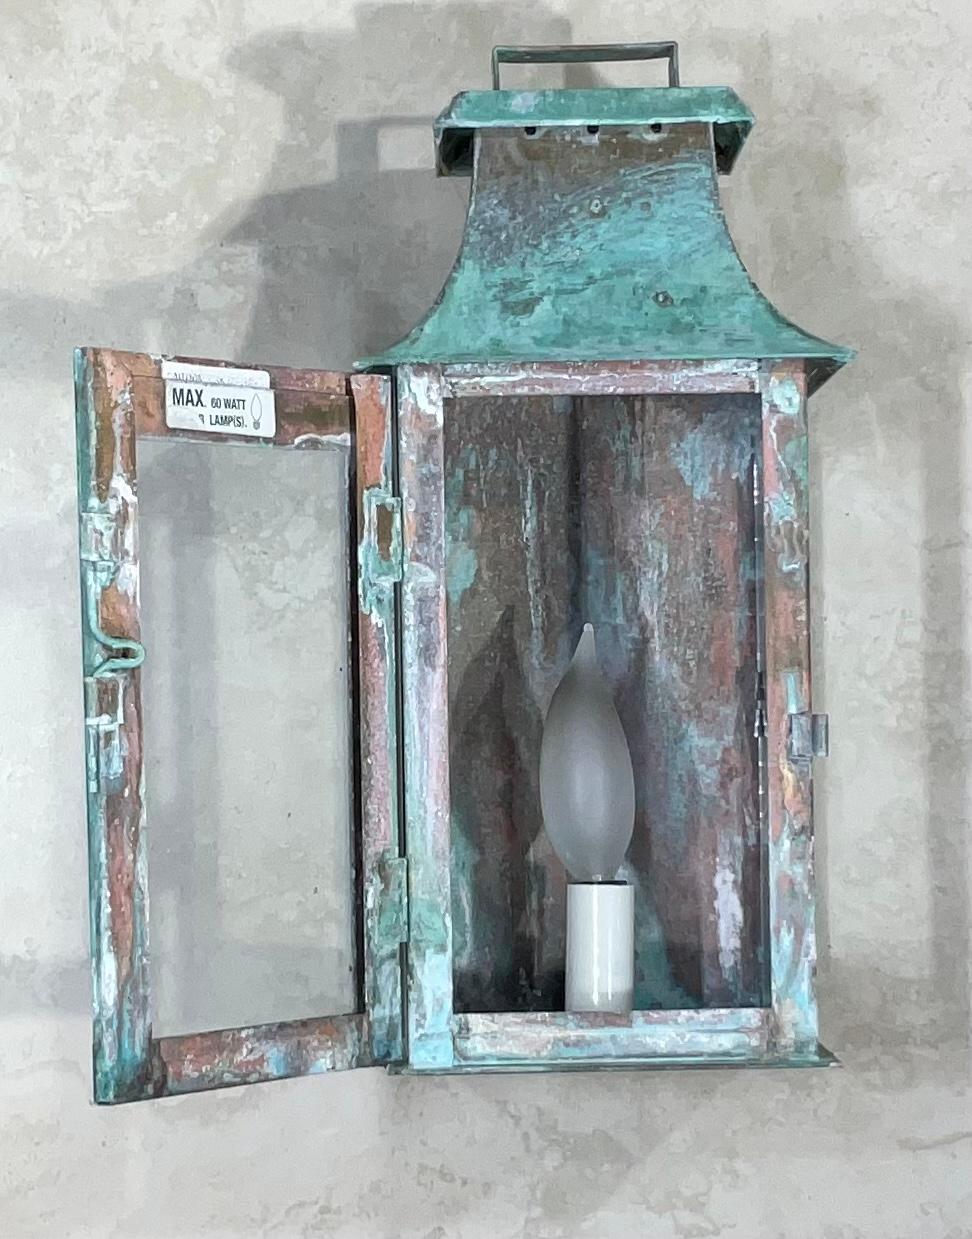 Wall lantern made of solid copper, beautiful oxidized patina with one 60/watt light. Suitable for wet location UL approved up to US code.